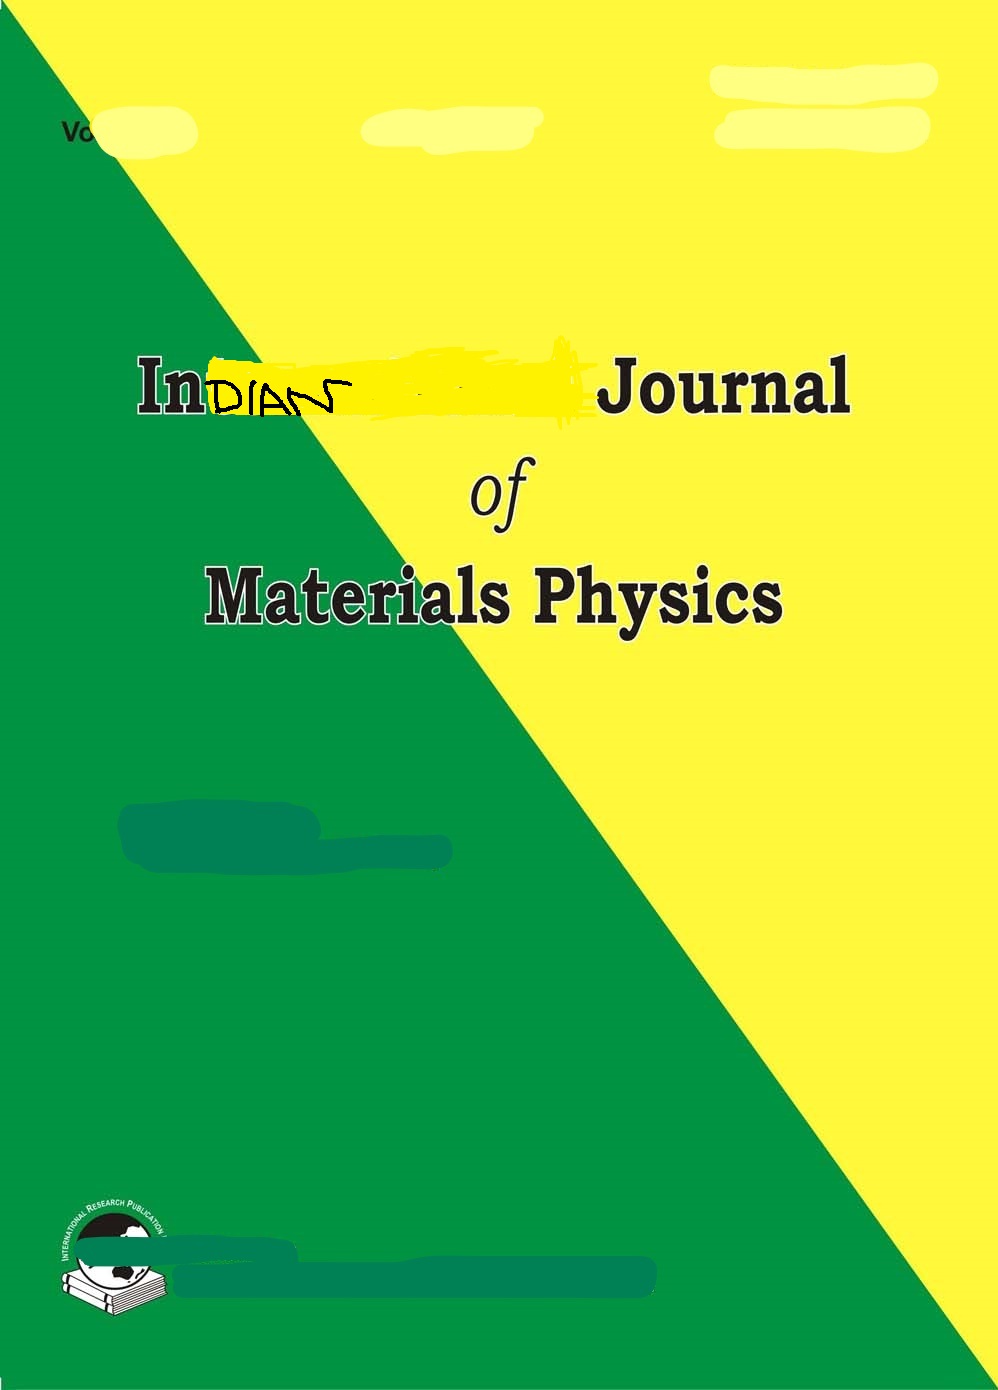 Indian Journal of Materials Physics